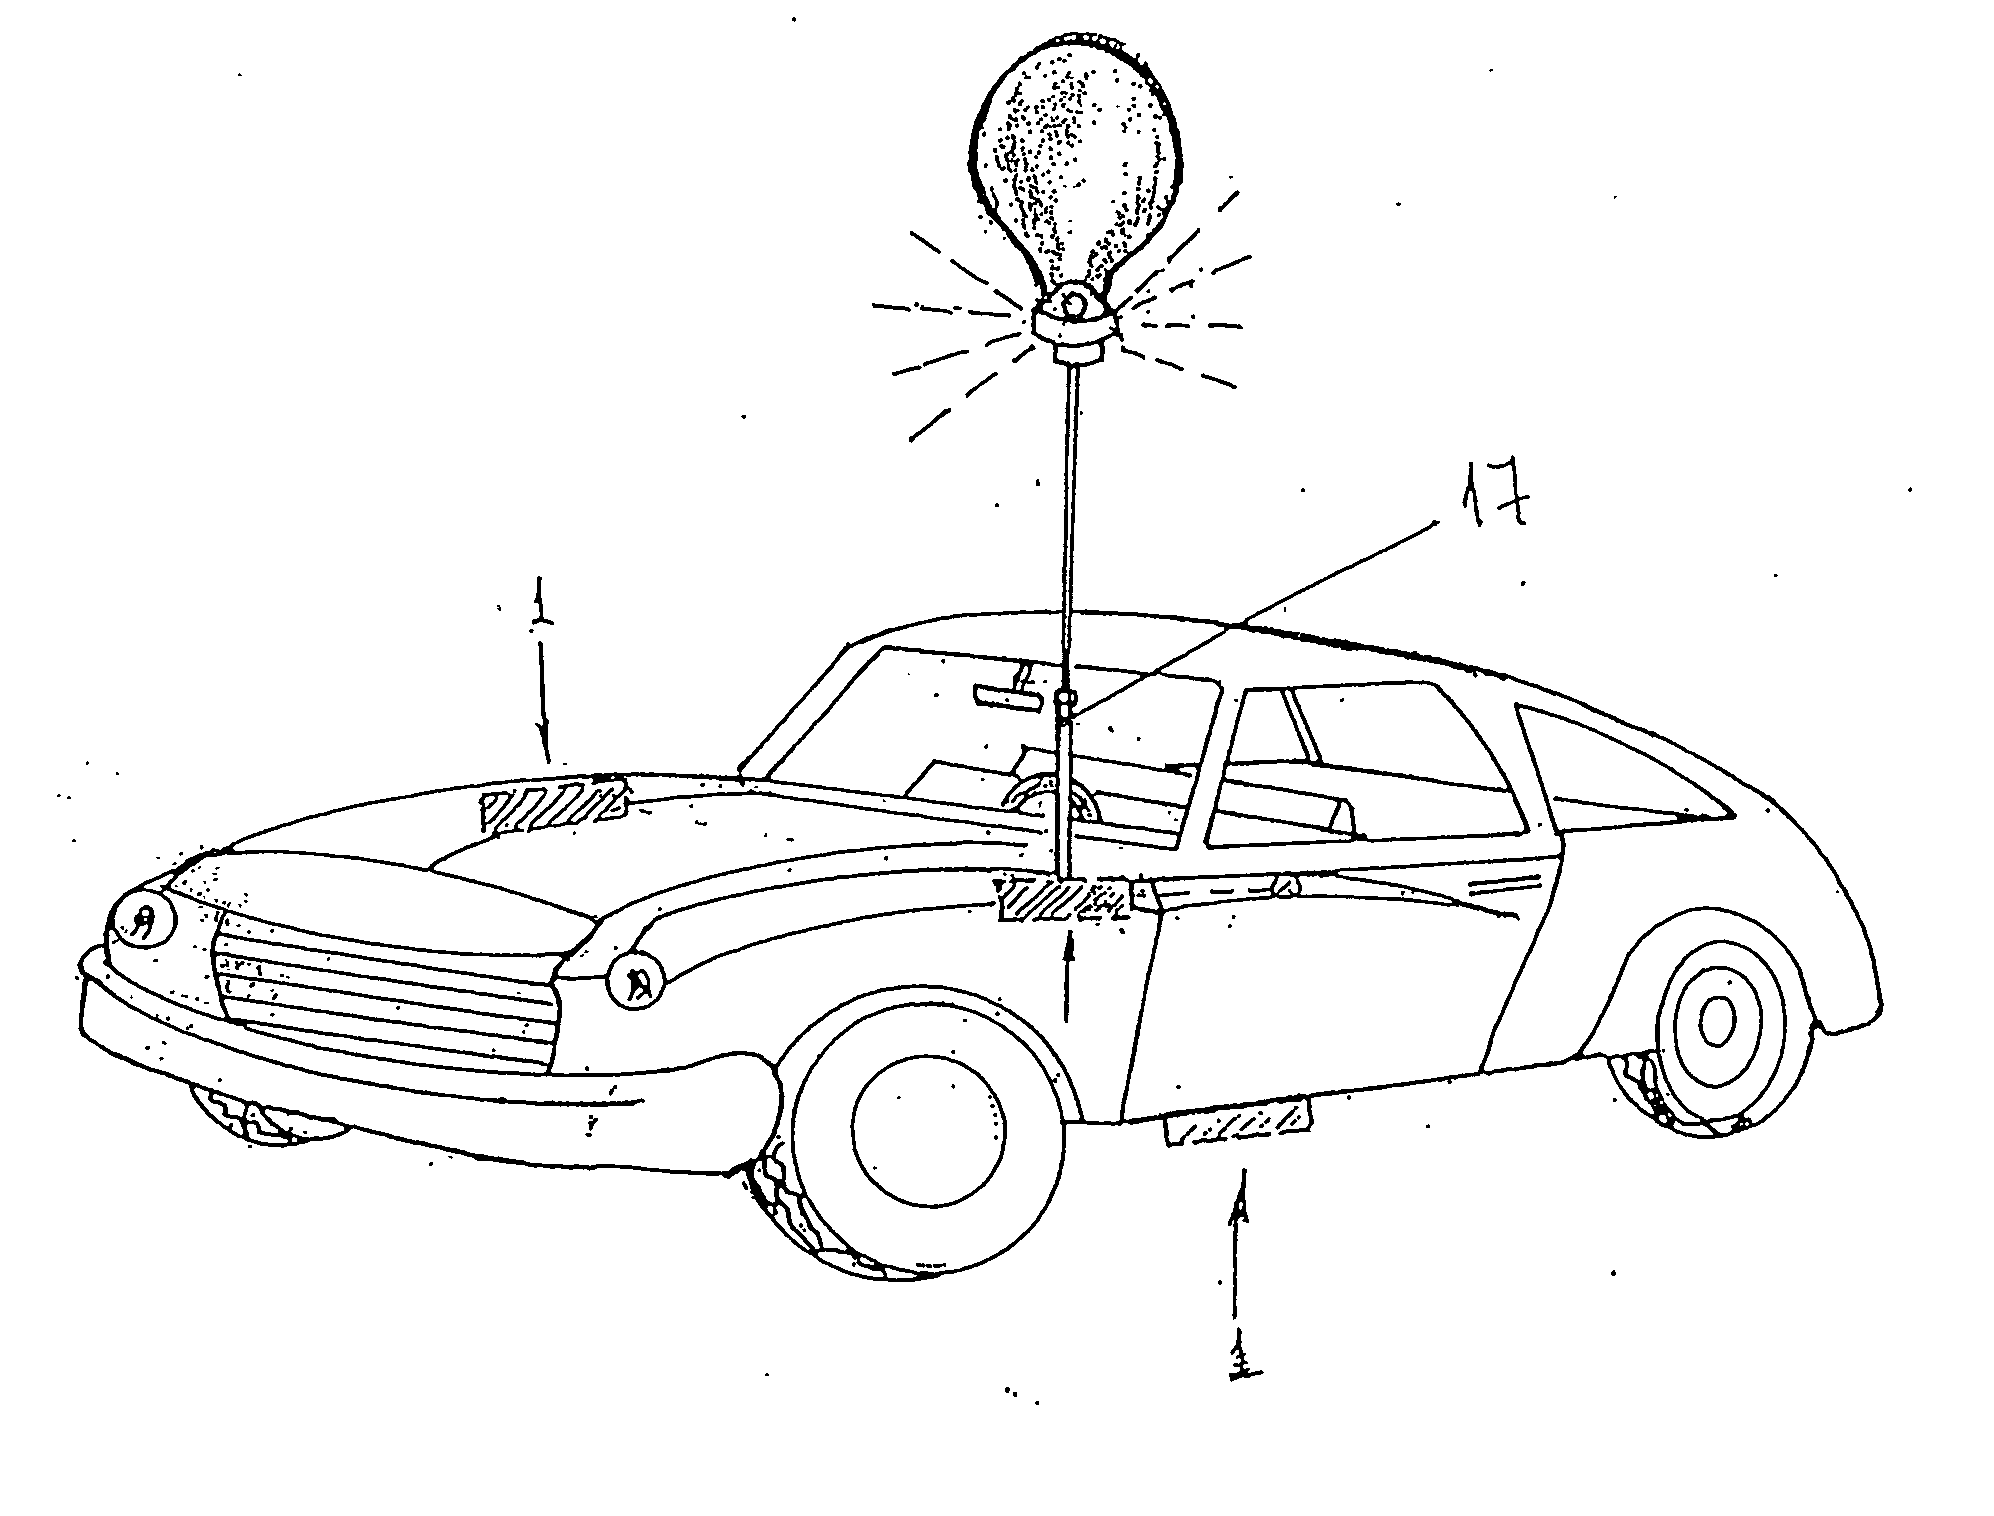 System for Signalling and Locating Vehicles Involved in Accidents, Stopped Vehicles and Vehicles with Mechanical Problems